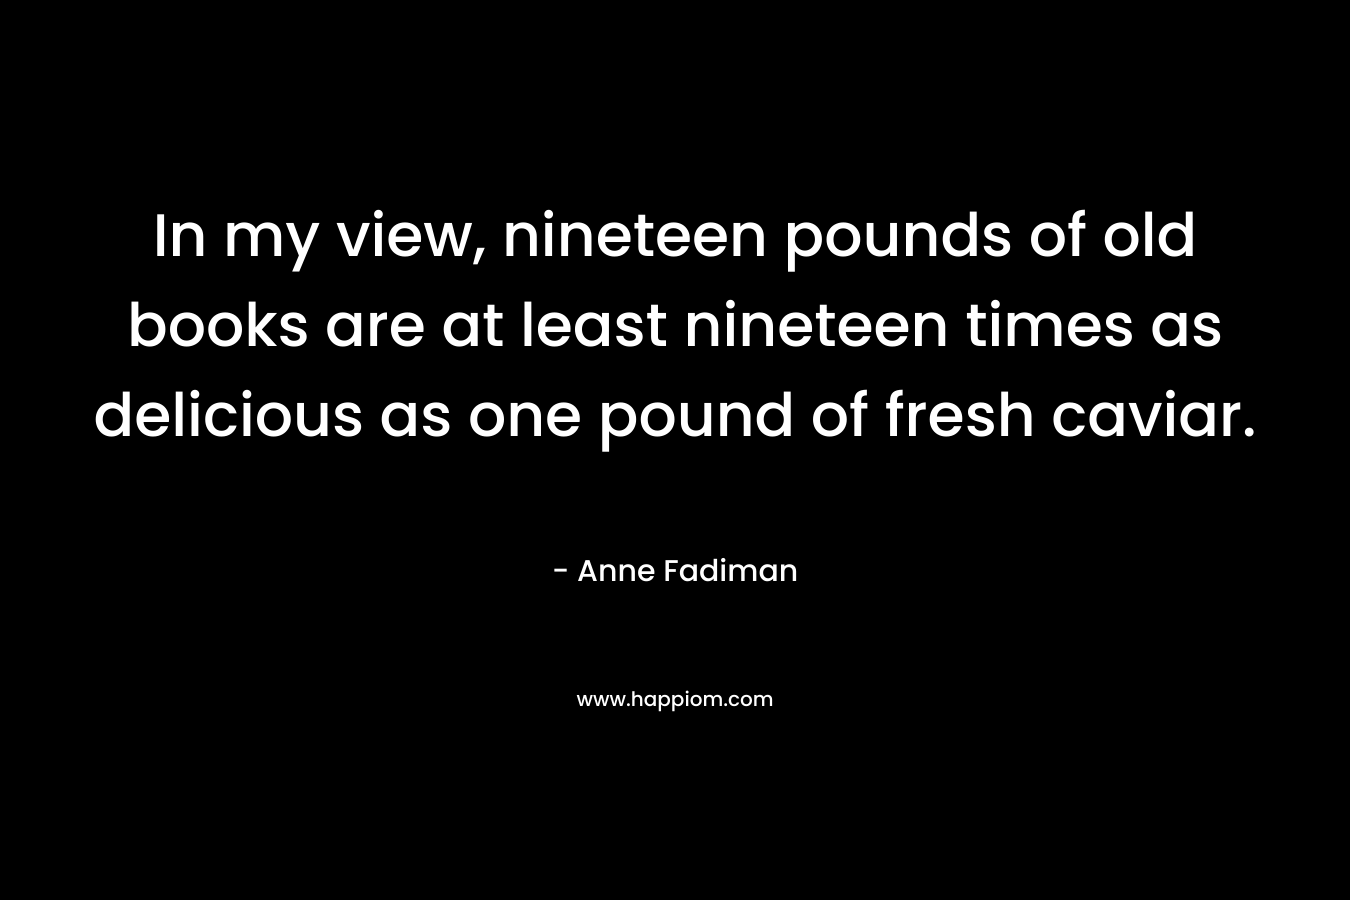 In my view, nineteen pounds of old books are at least nineteen times as delicious as one pound of fresh caviar. – Anne Fadiman